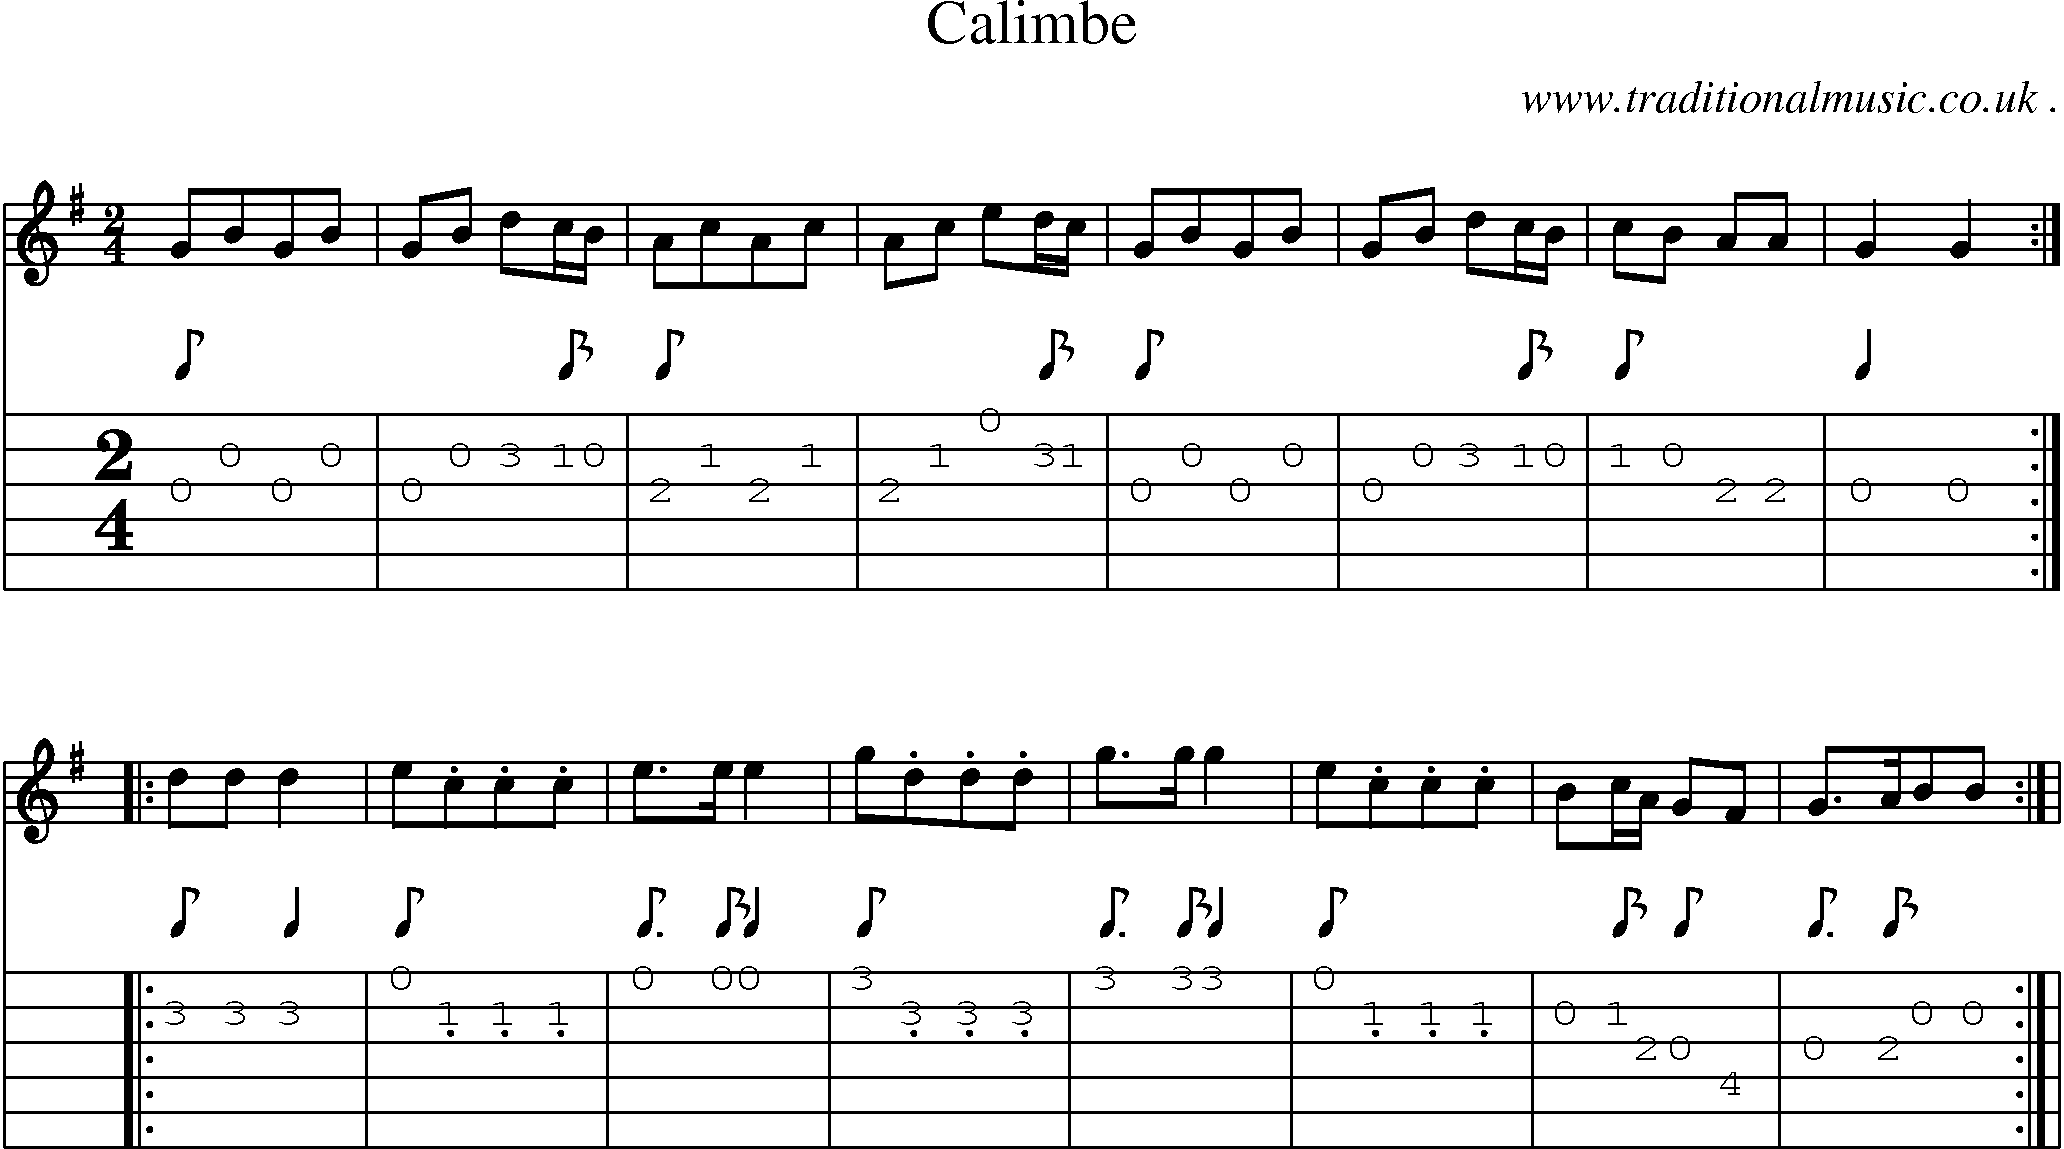 Sheet-Music and Guitar Tabs for Calimbe